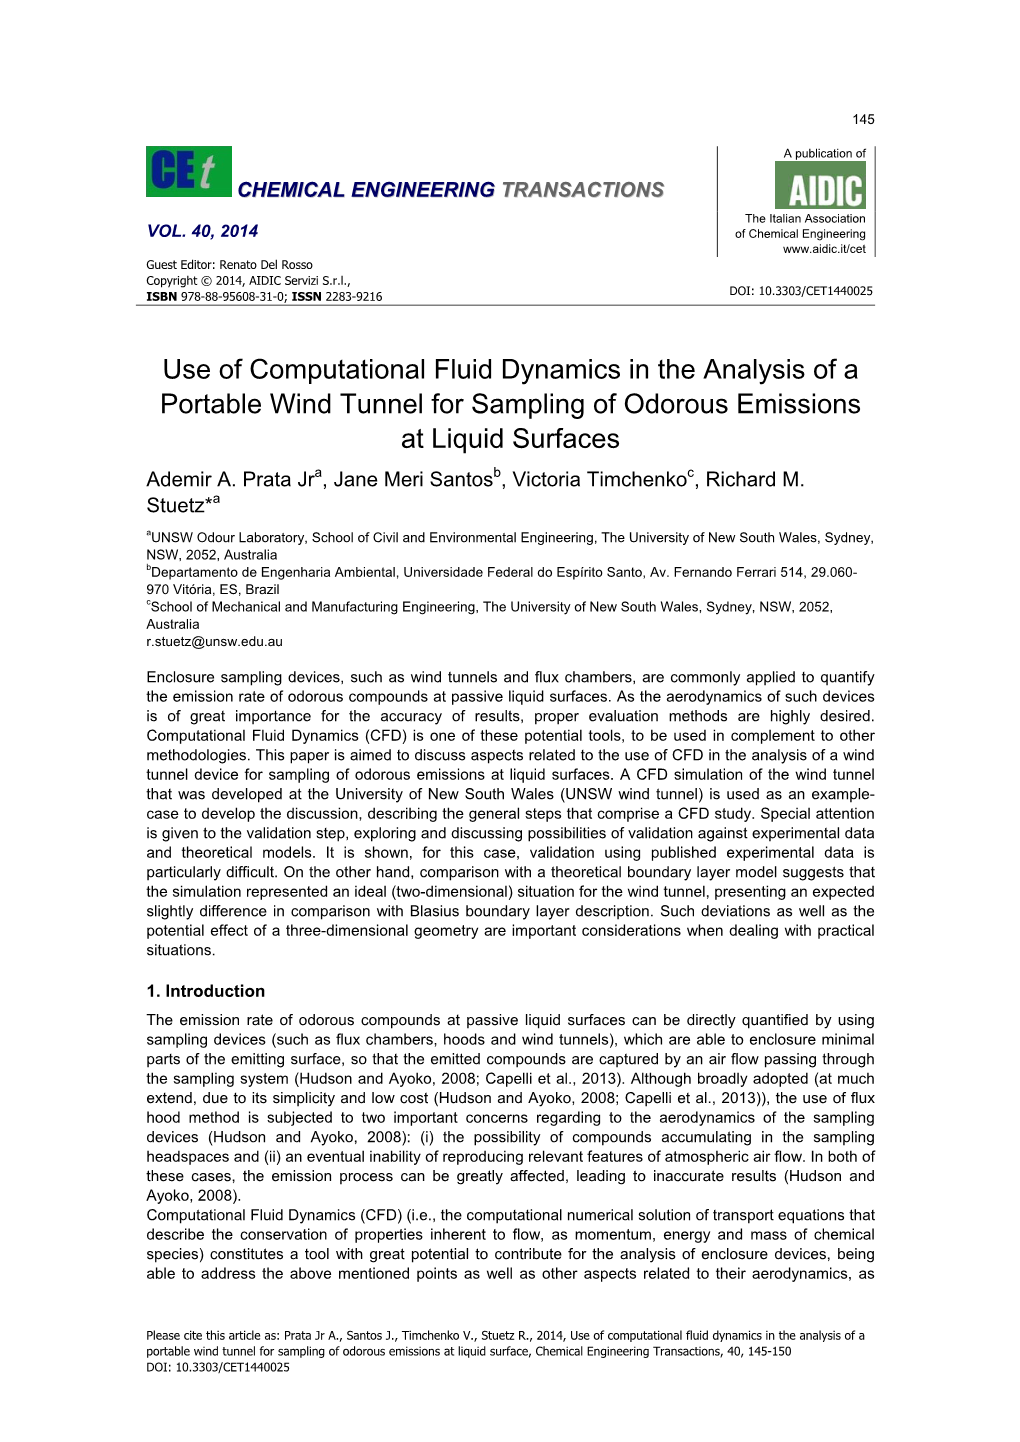 Use of Computational Fluid Dynamics in the Analysis of a Portable Wind Tunnel for Sampling of Odorous Emissions